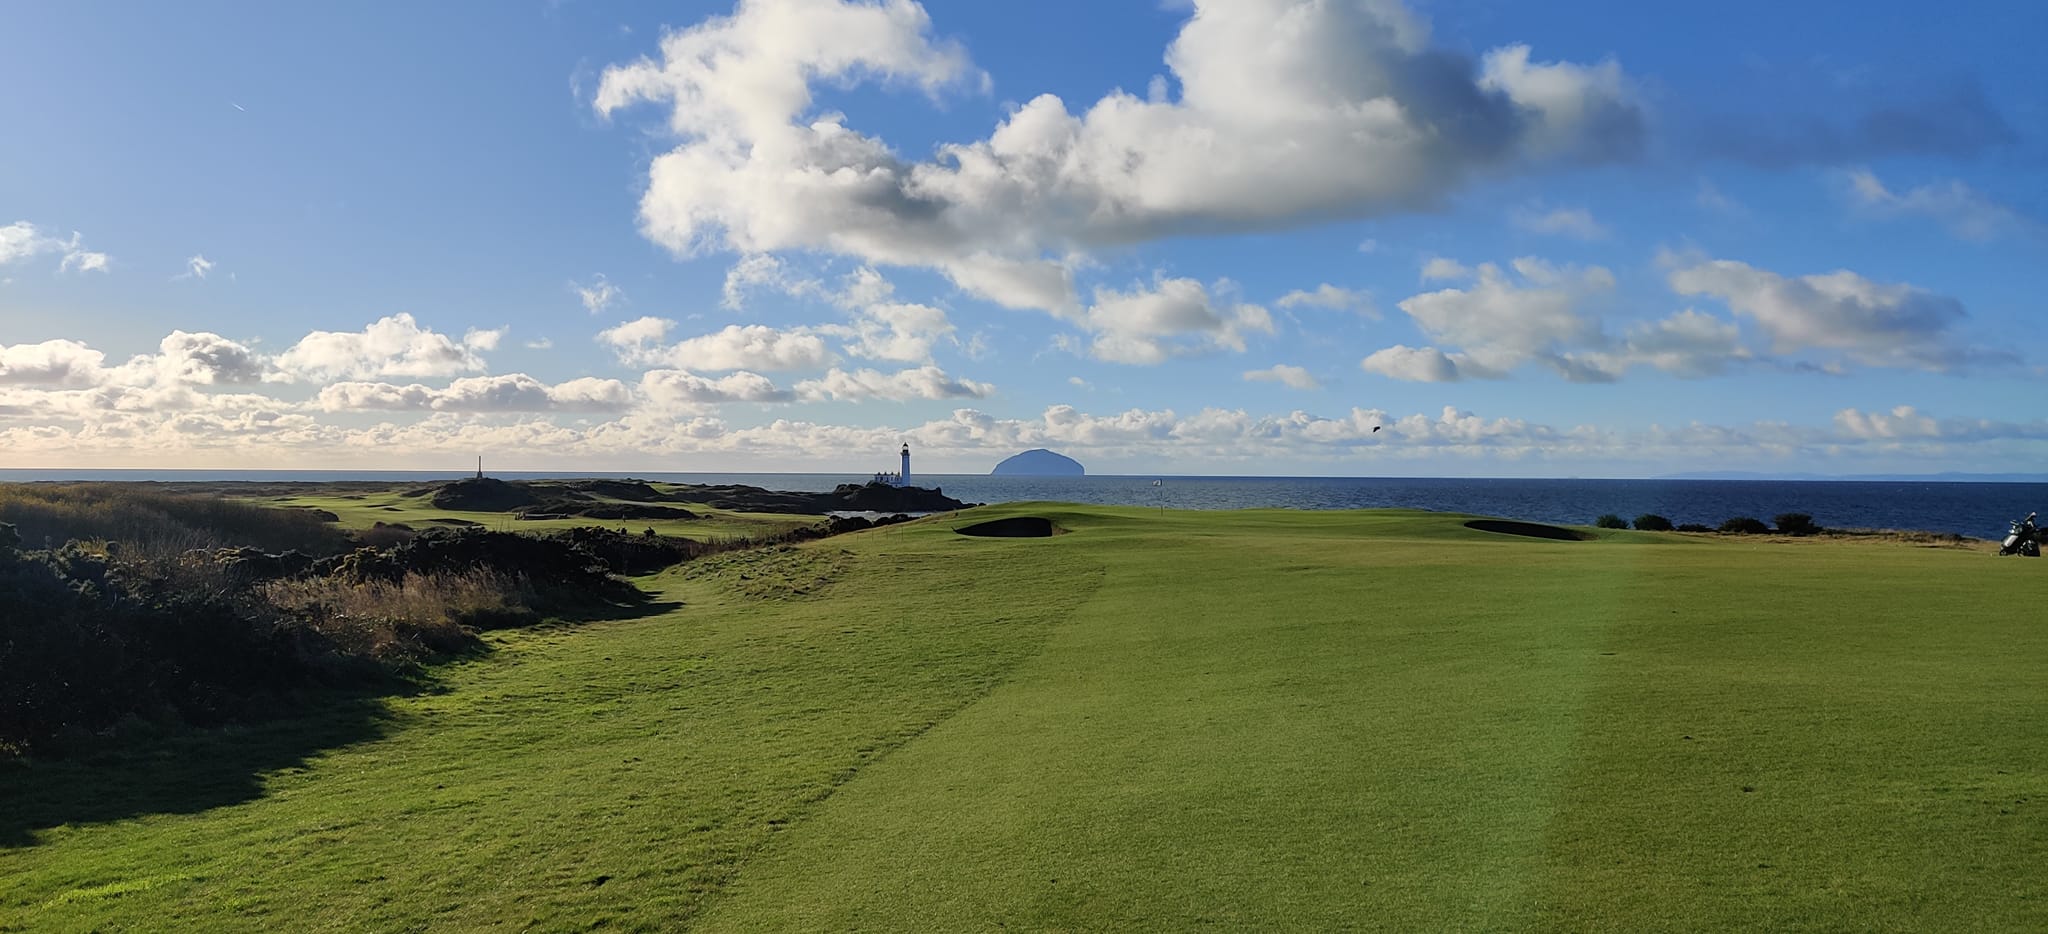 RTB Golf Course Turnberry